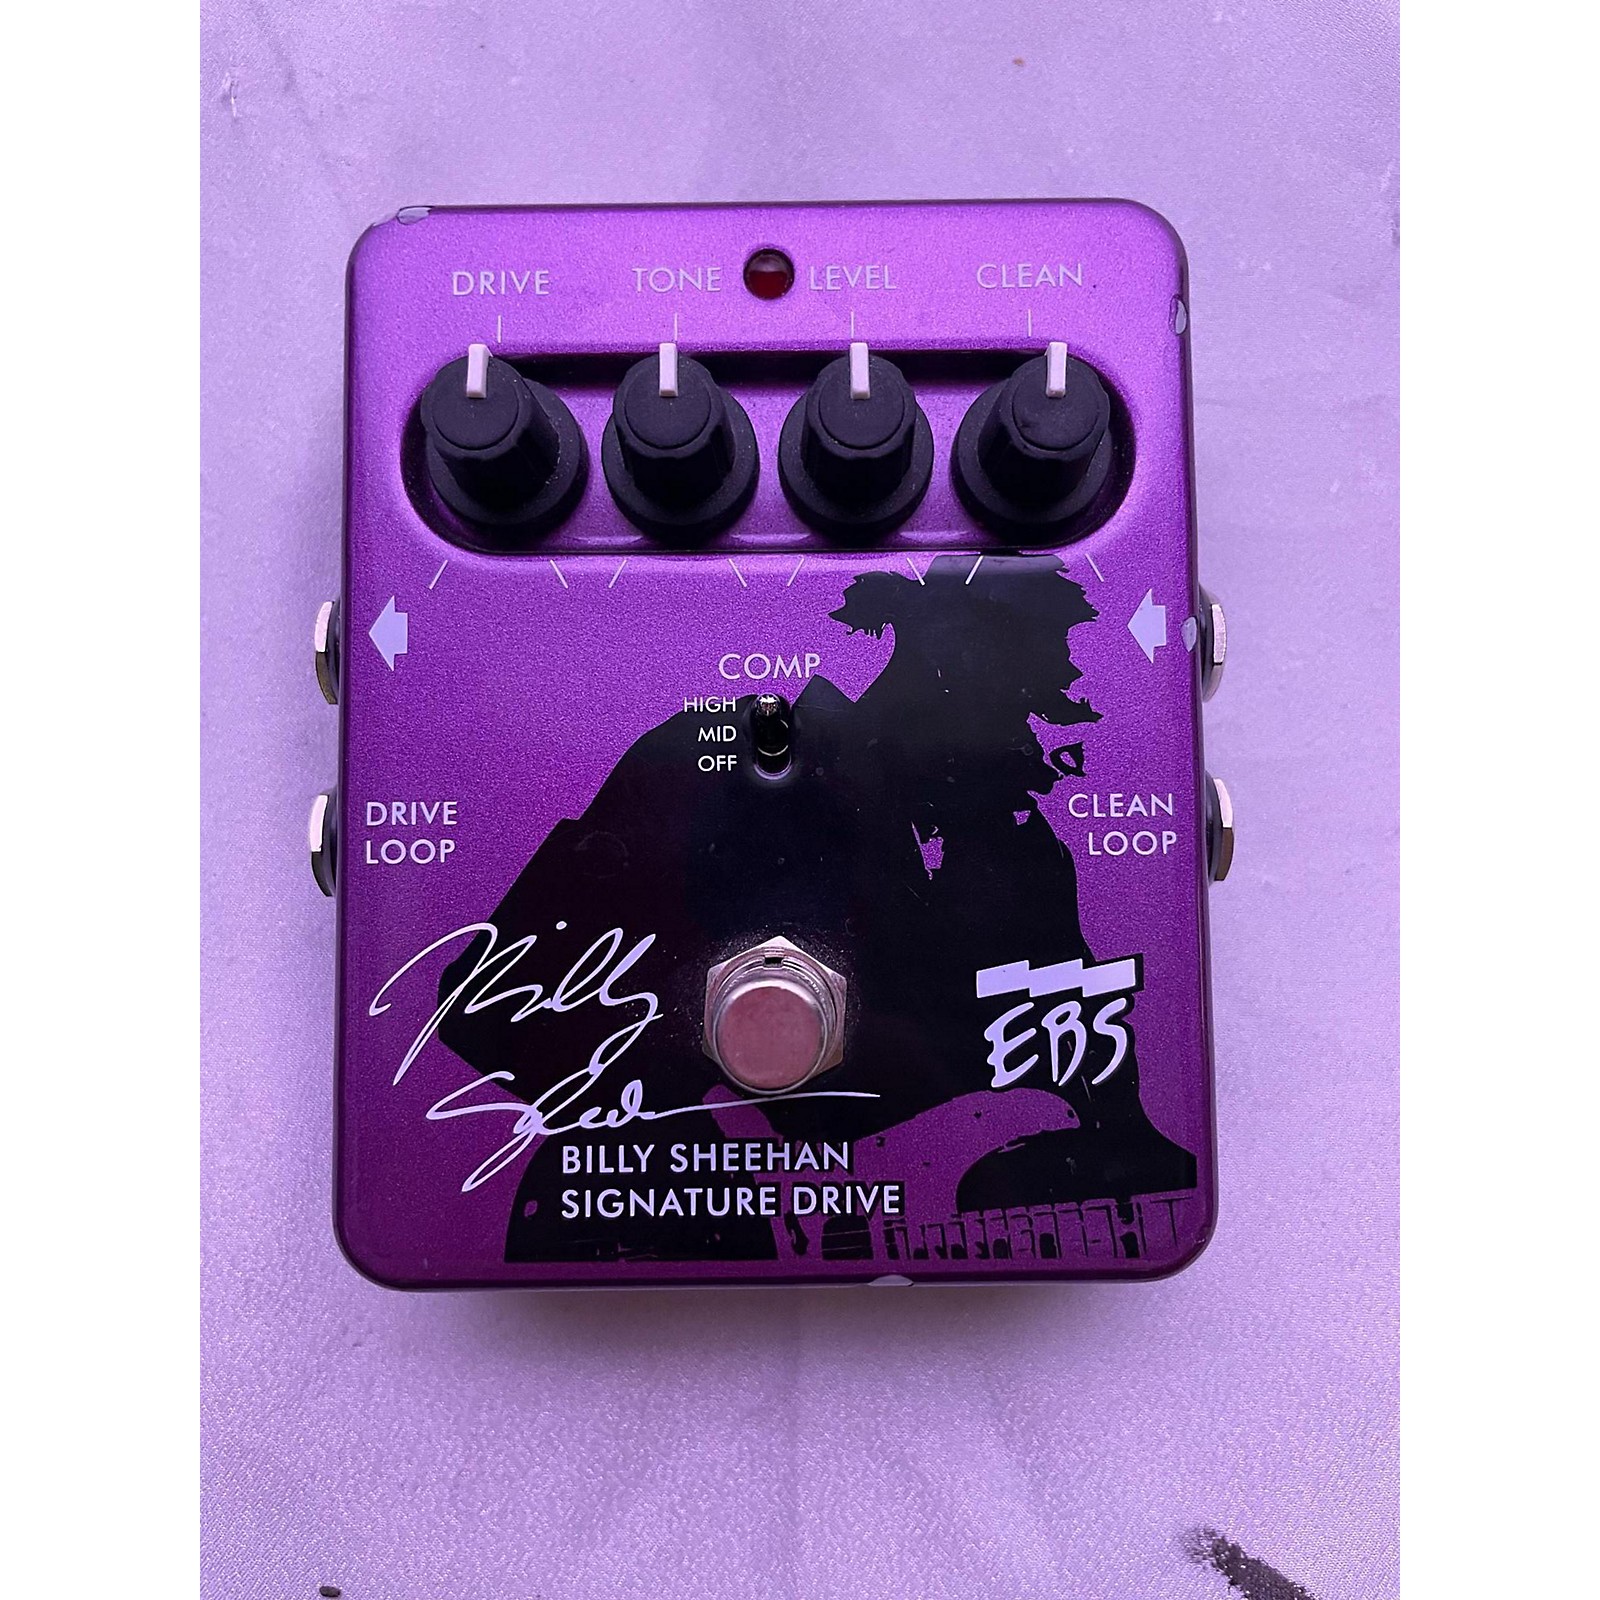 Used EBS Billy Sheehan Signature Overdrive Bass Effect Pedal 